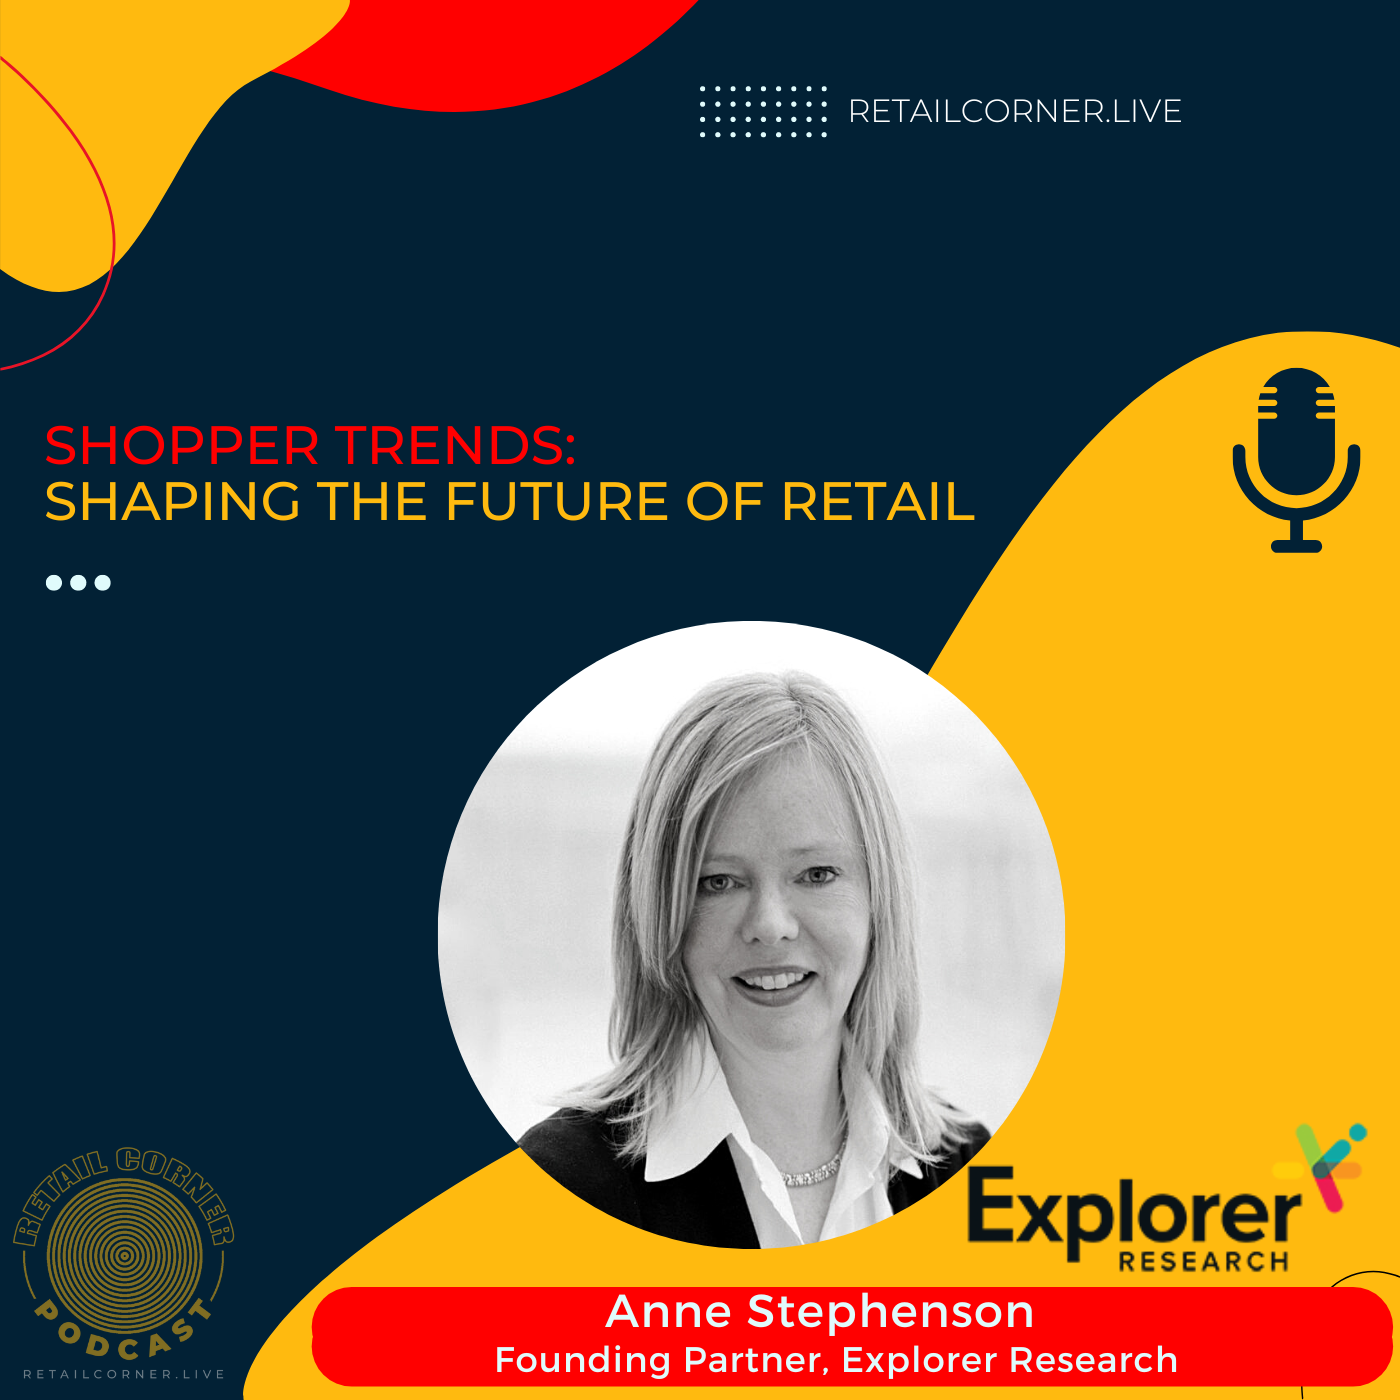 Shopper Trends: Shaping the Future of Retail - Anne Stephenson, Explorer Research Image